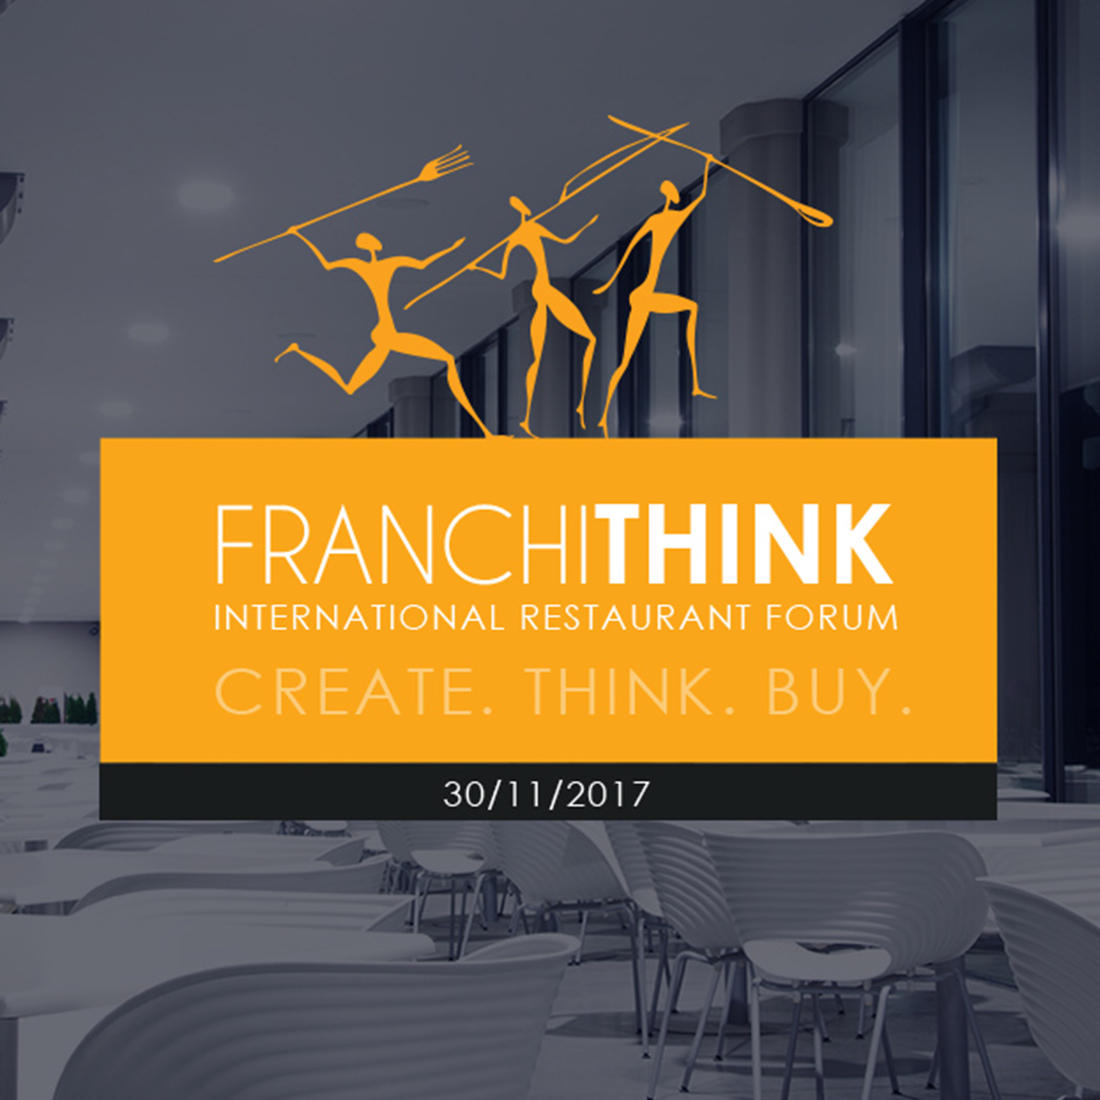 For the First Time in Ukraine: FRANCHITHINK